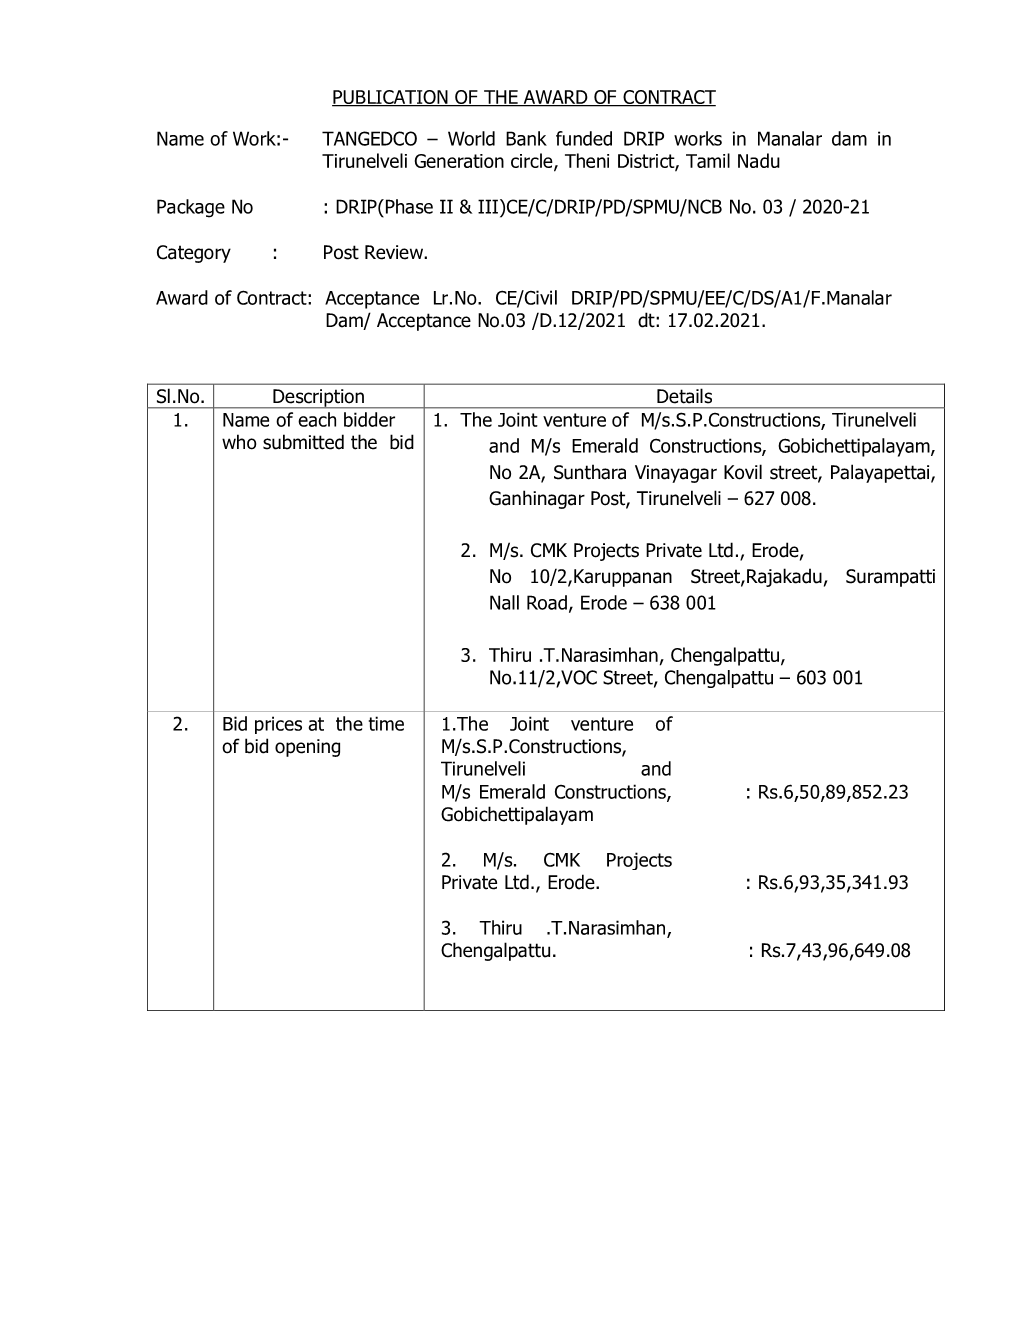 PUBLICATION of the AWARD of CONTRACT Name of Work:- TANGEDCO – World Bank Funded DRIP Works in Manalar Dam in Tirunelveli Ge